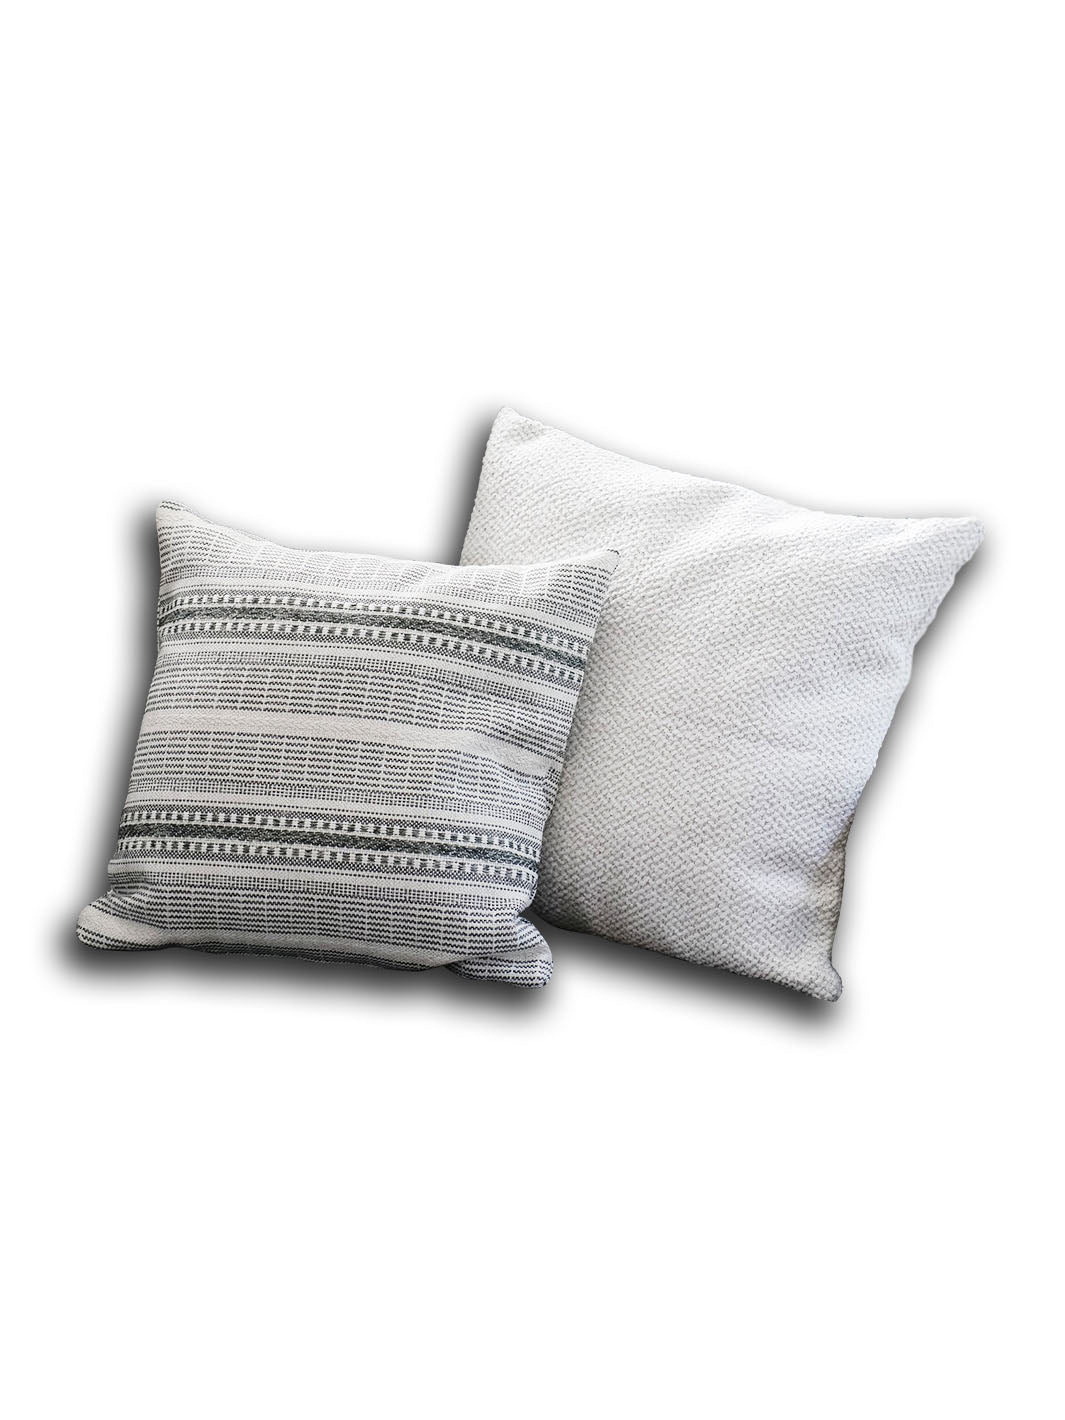 Earthly Comfort Dreamy White Boucle Pillow Cover Earthly Comfort Home Decor 1858